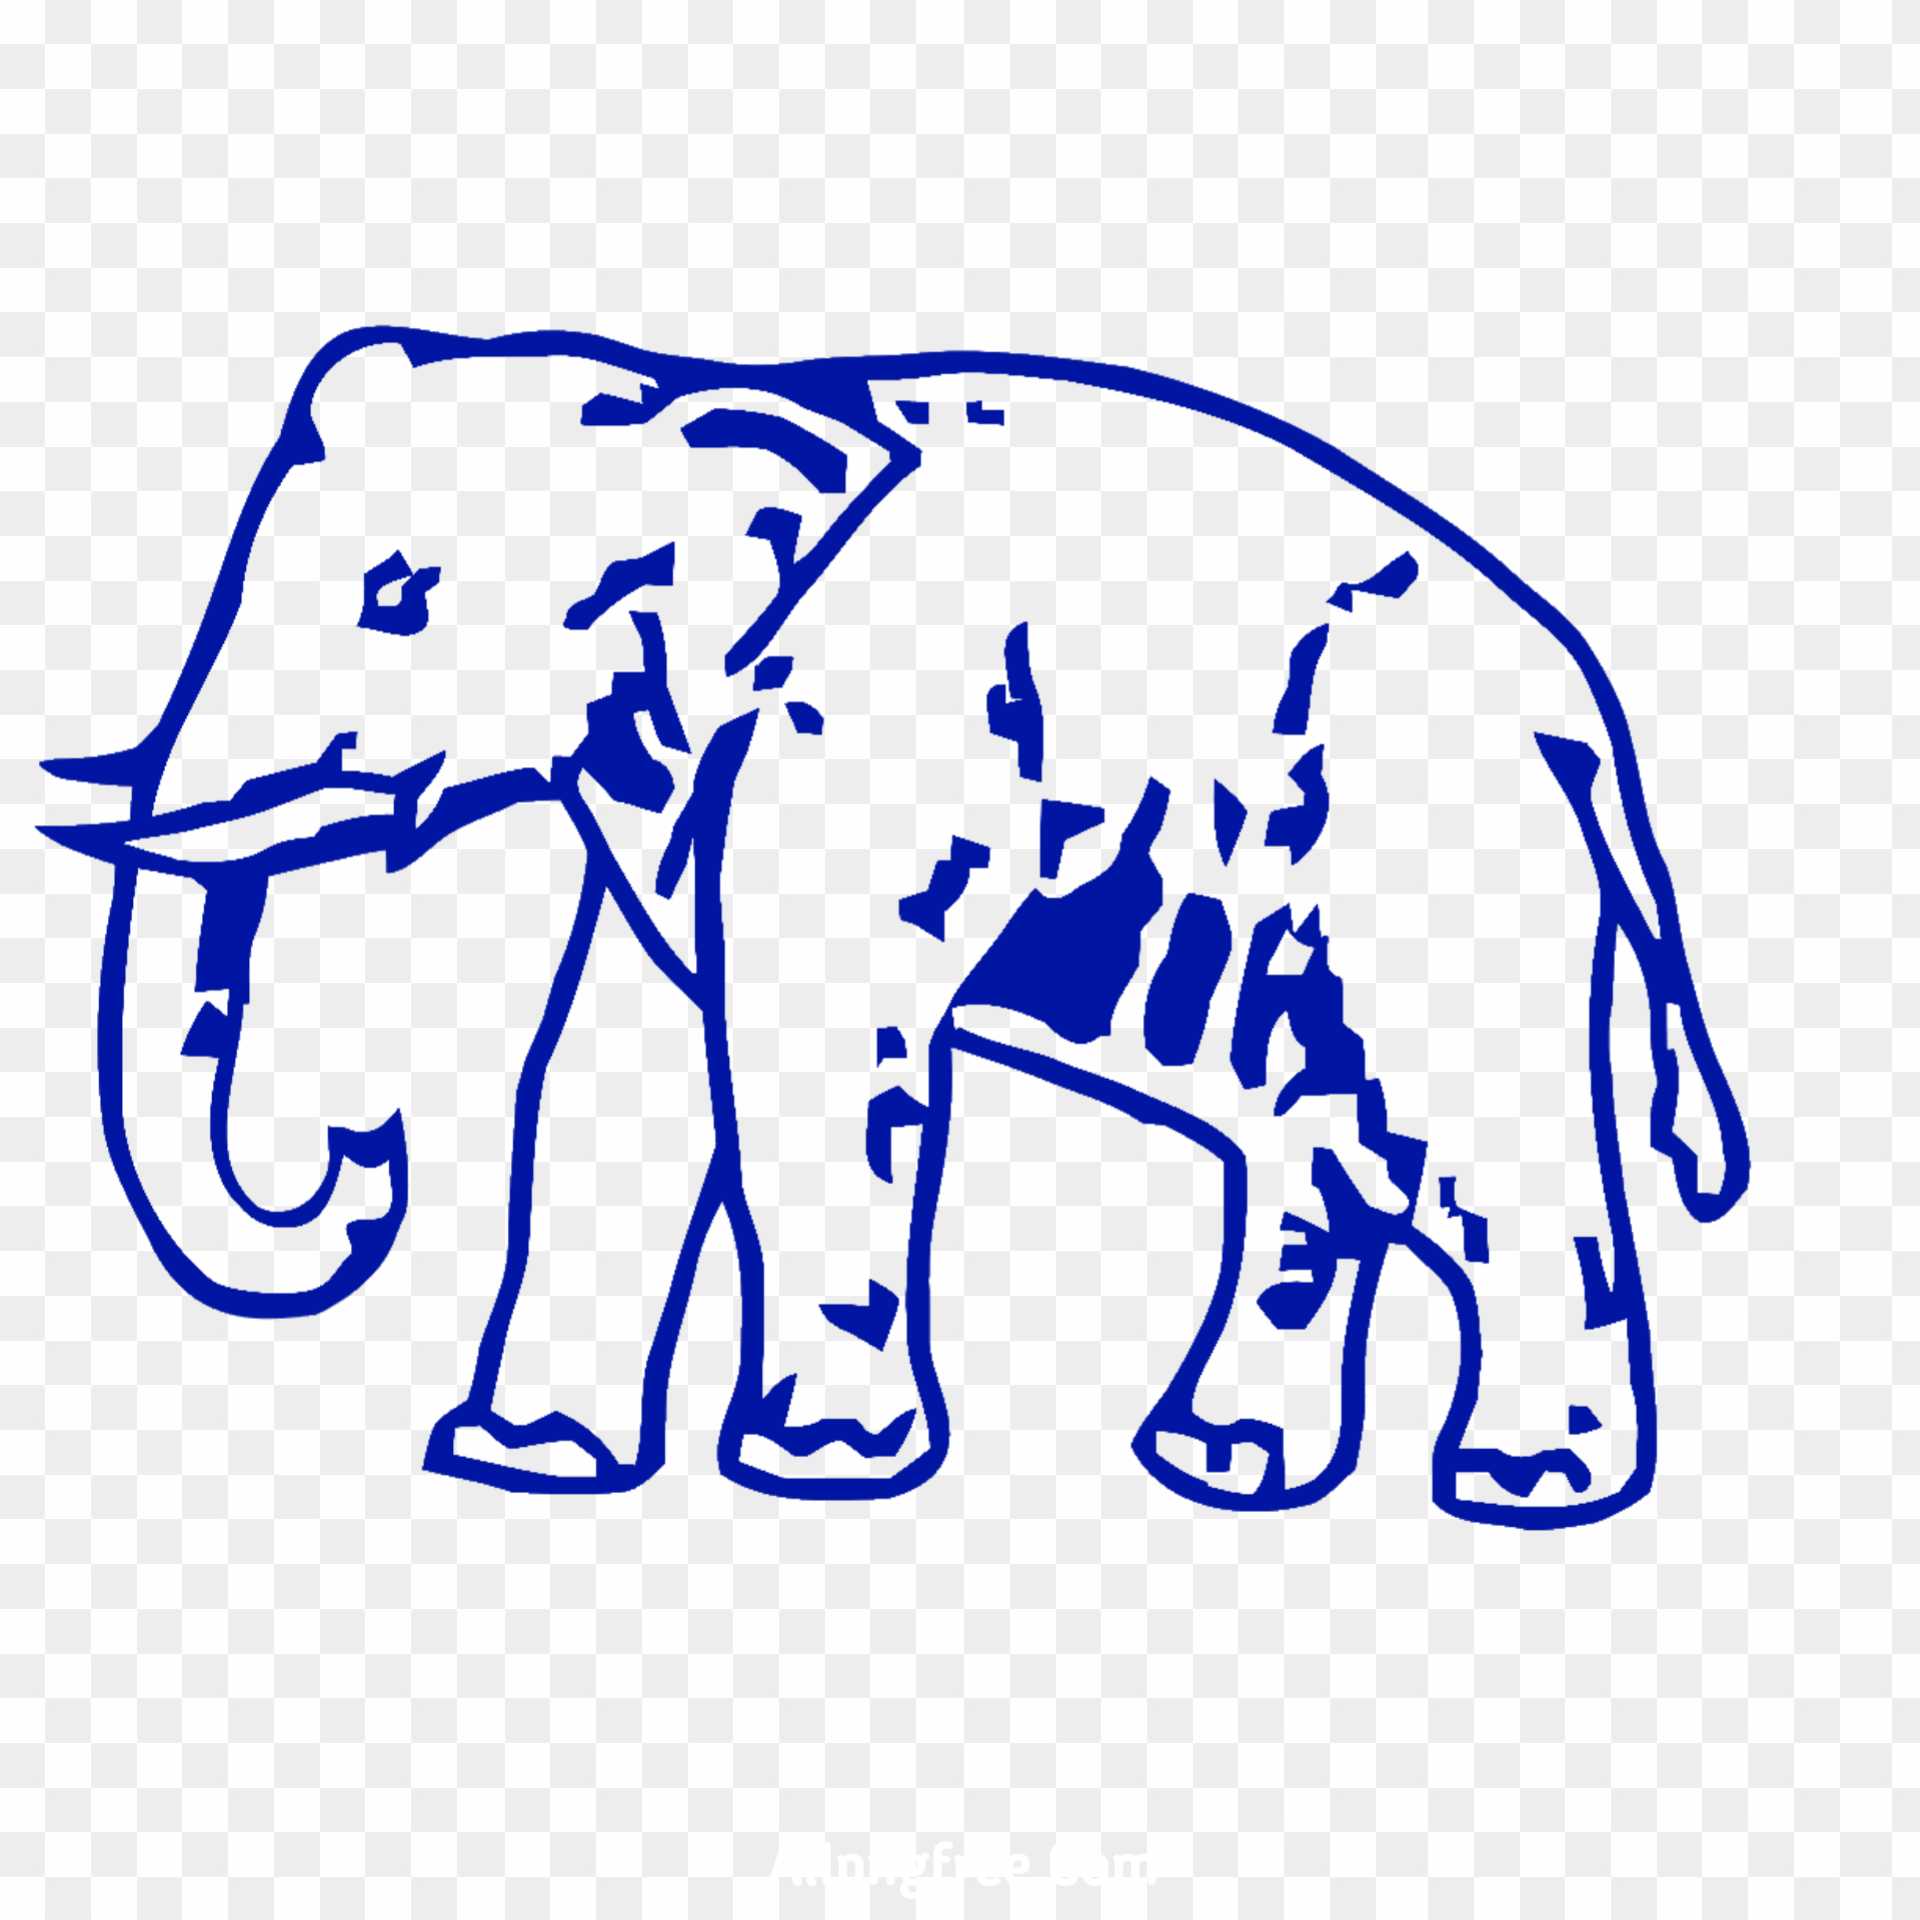 African elephant - elephants png download - 1200*1200 - Free Transparent  Elephant png Download. - Clip Art Library